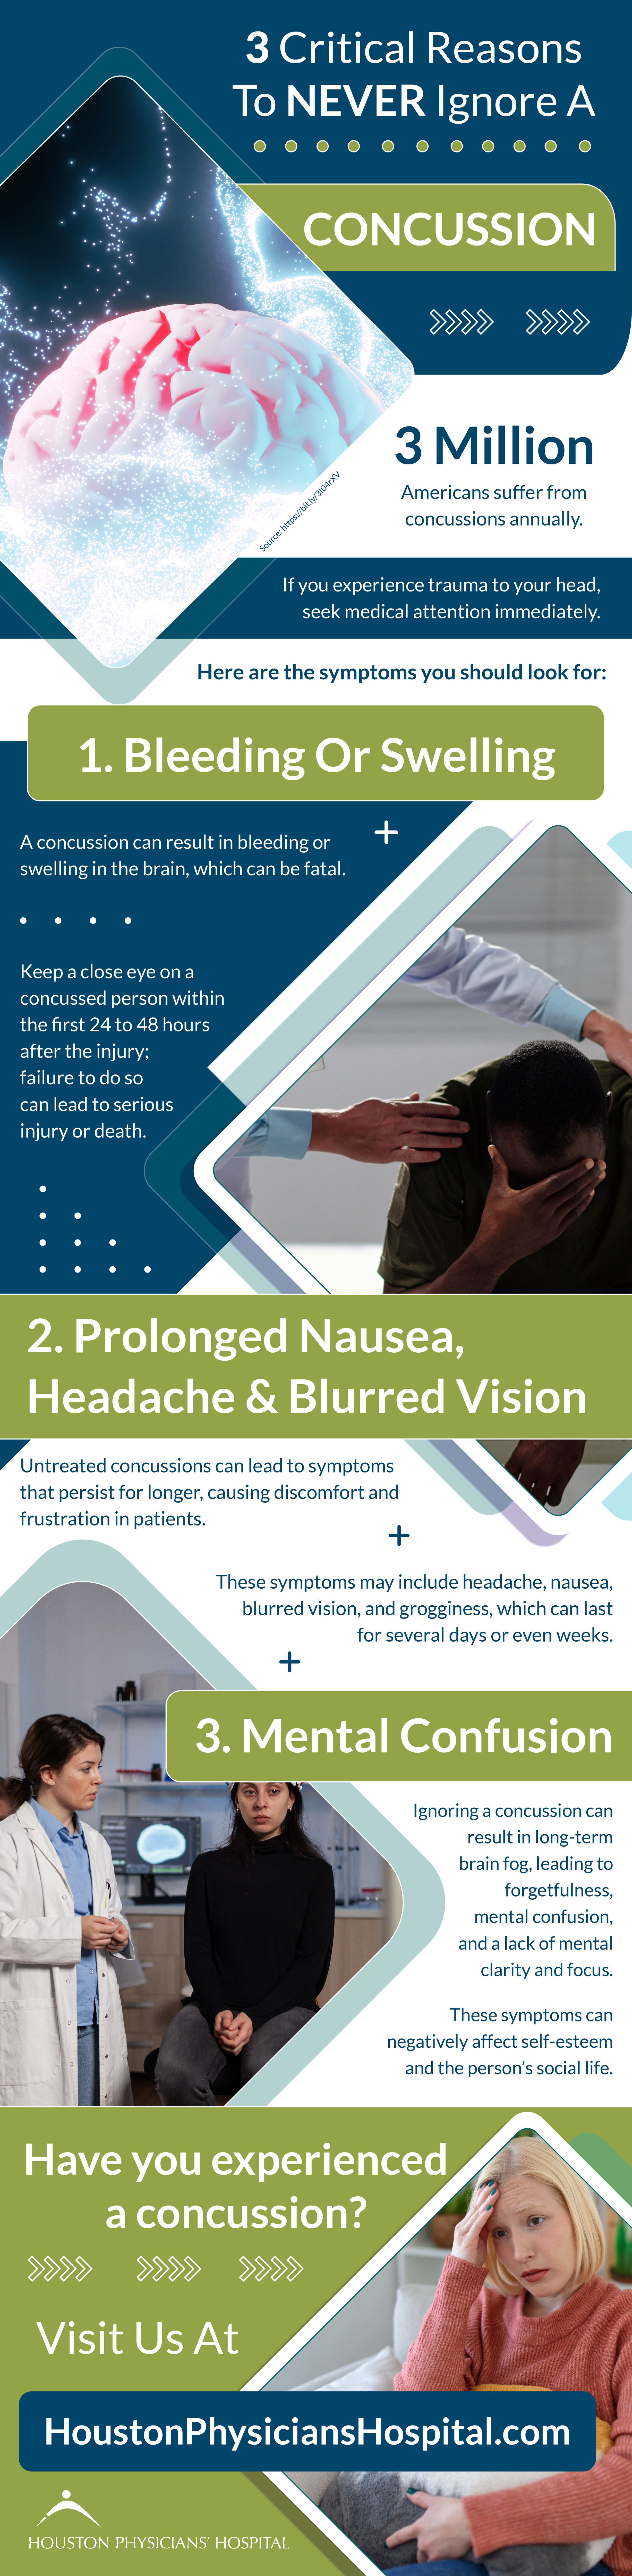 3 Critical Reasons To Never Ignore a Concussion Infograph